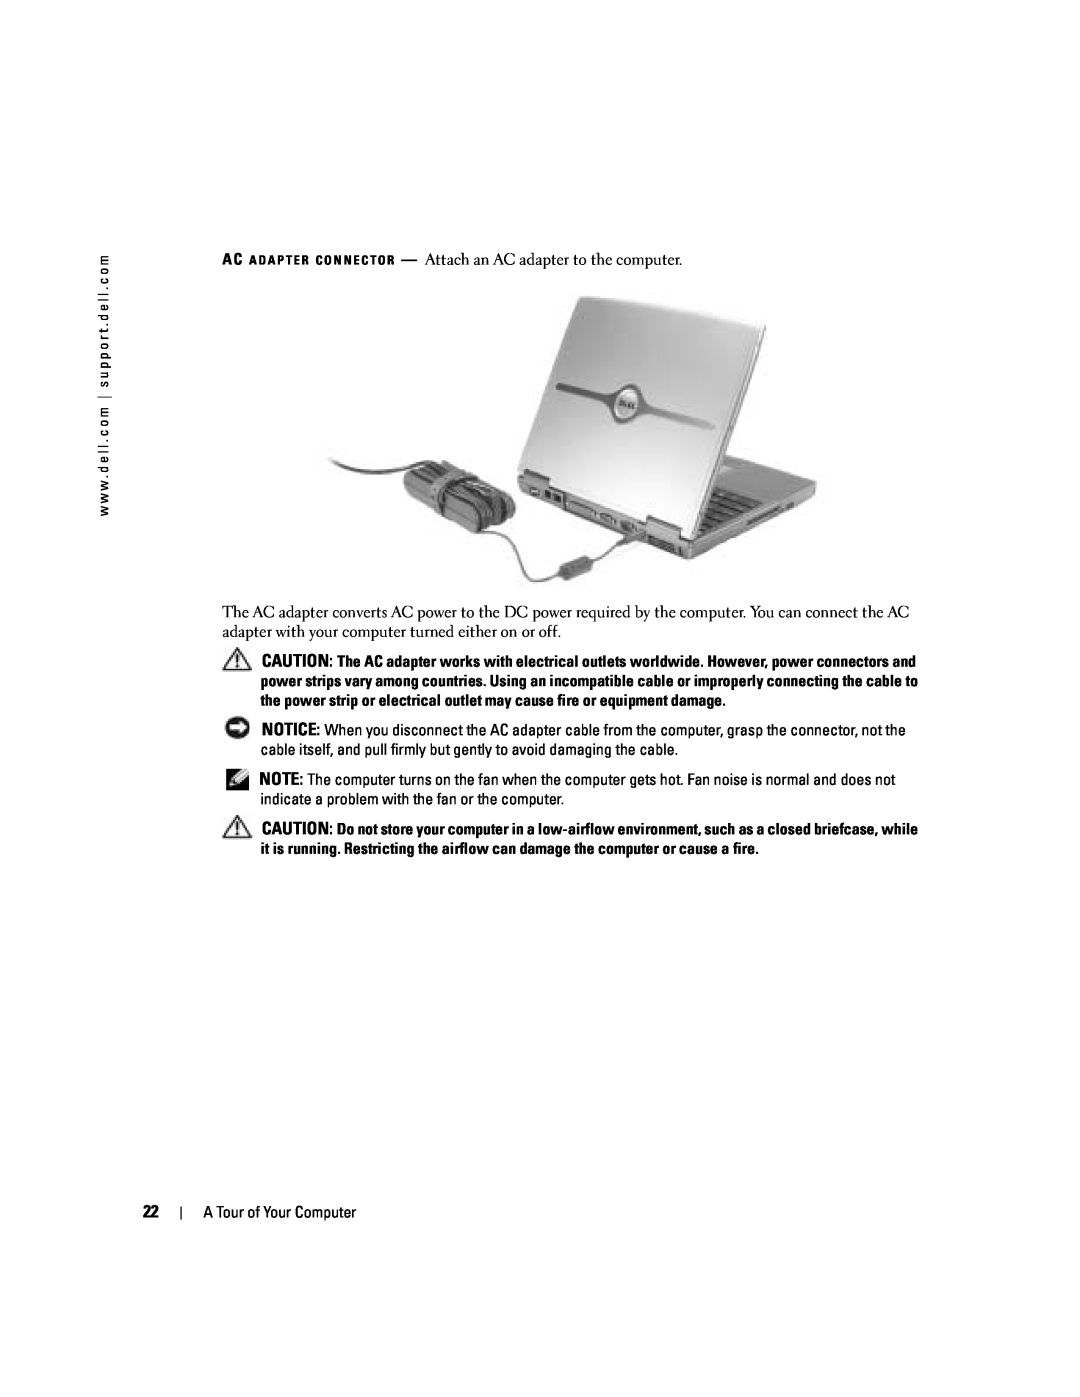 Dell PP10L owner manual AC A D A P T E R C O N N E C T O R - Attach an AC adapter to the computer 